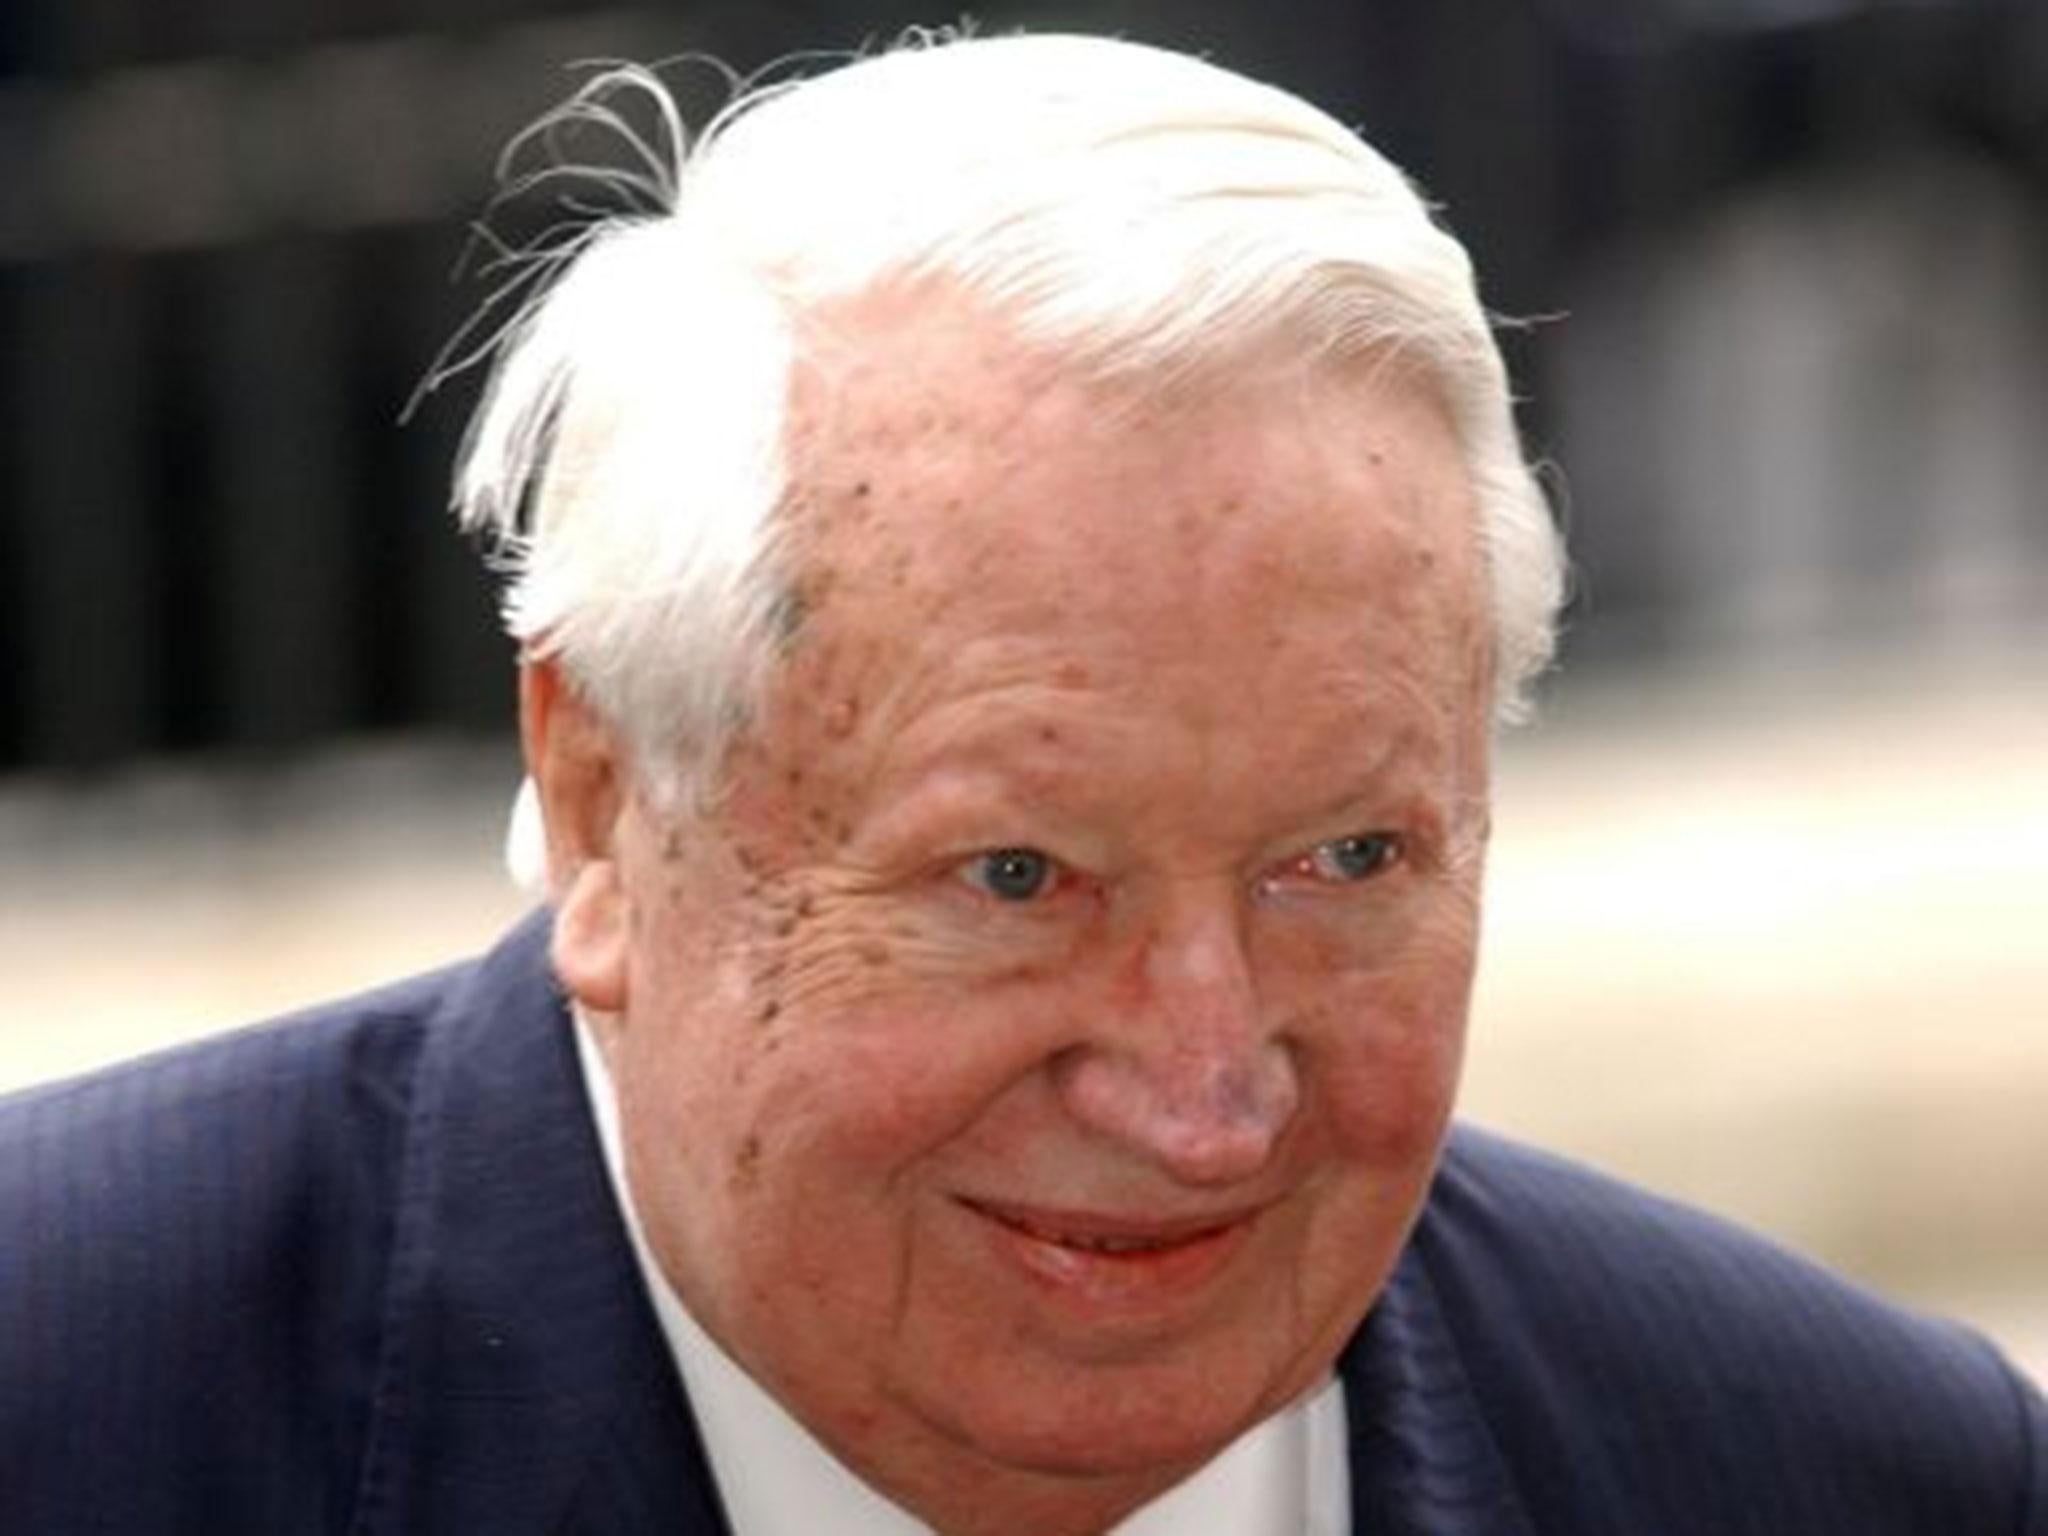 Sir Edward Heath, as a fifth police force received allegations against the former prime minister, who is at the centre of historical child sex claims.